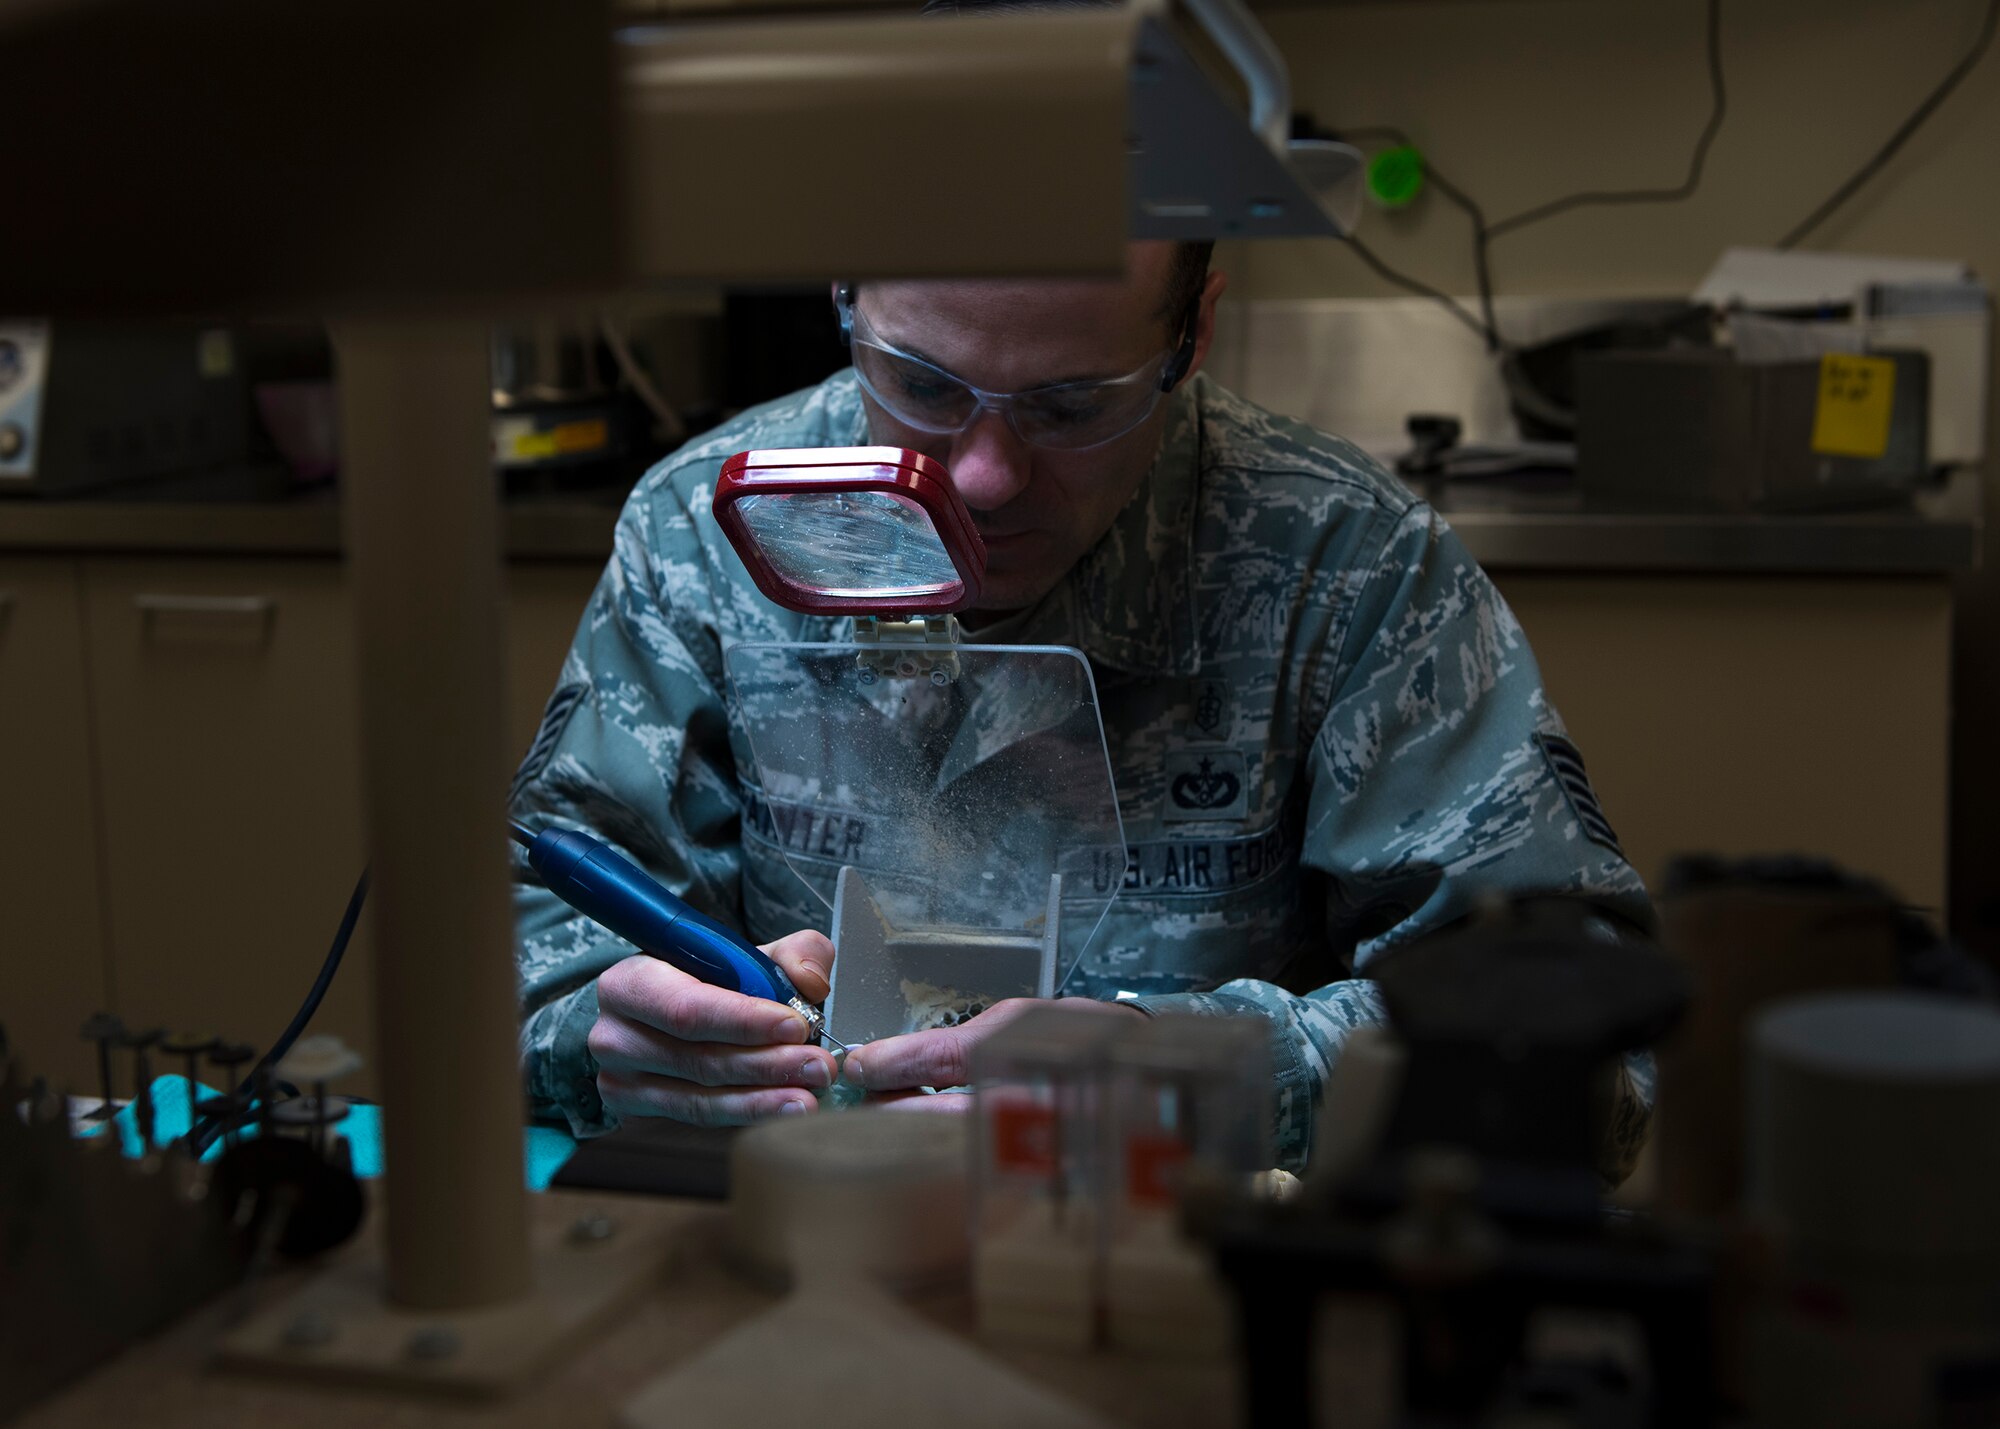 Tech. Sgt. Manuel Painter, 92nd Aerospace Medicine Squadron dental technician, works on dental appliances with precision tools April 07, 2017, at Fairchild Air Force Base, Wash. Magnification is a requirement to precisely shape a crown tooth replacement. (U.S. Air Force photo/A1C Ryan Lackey)